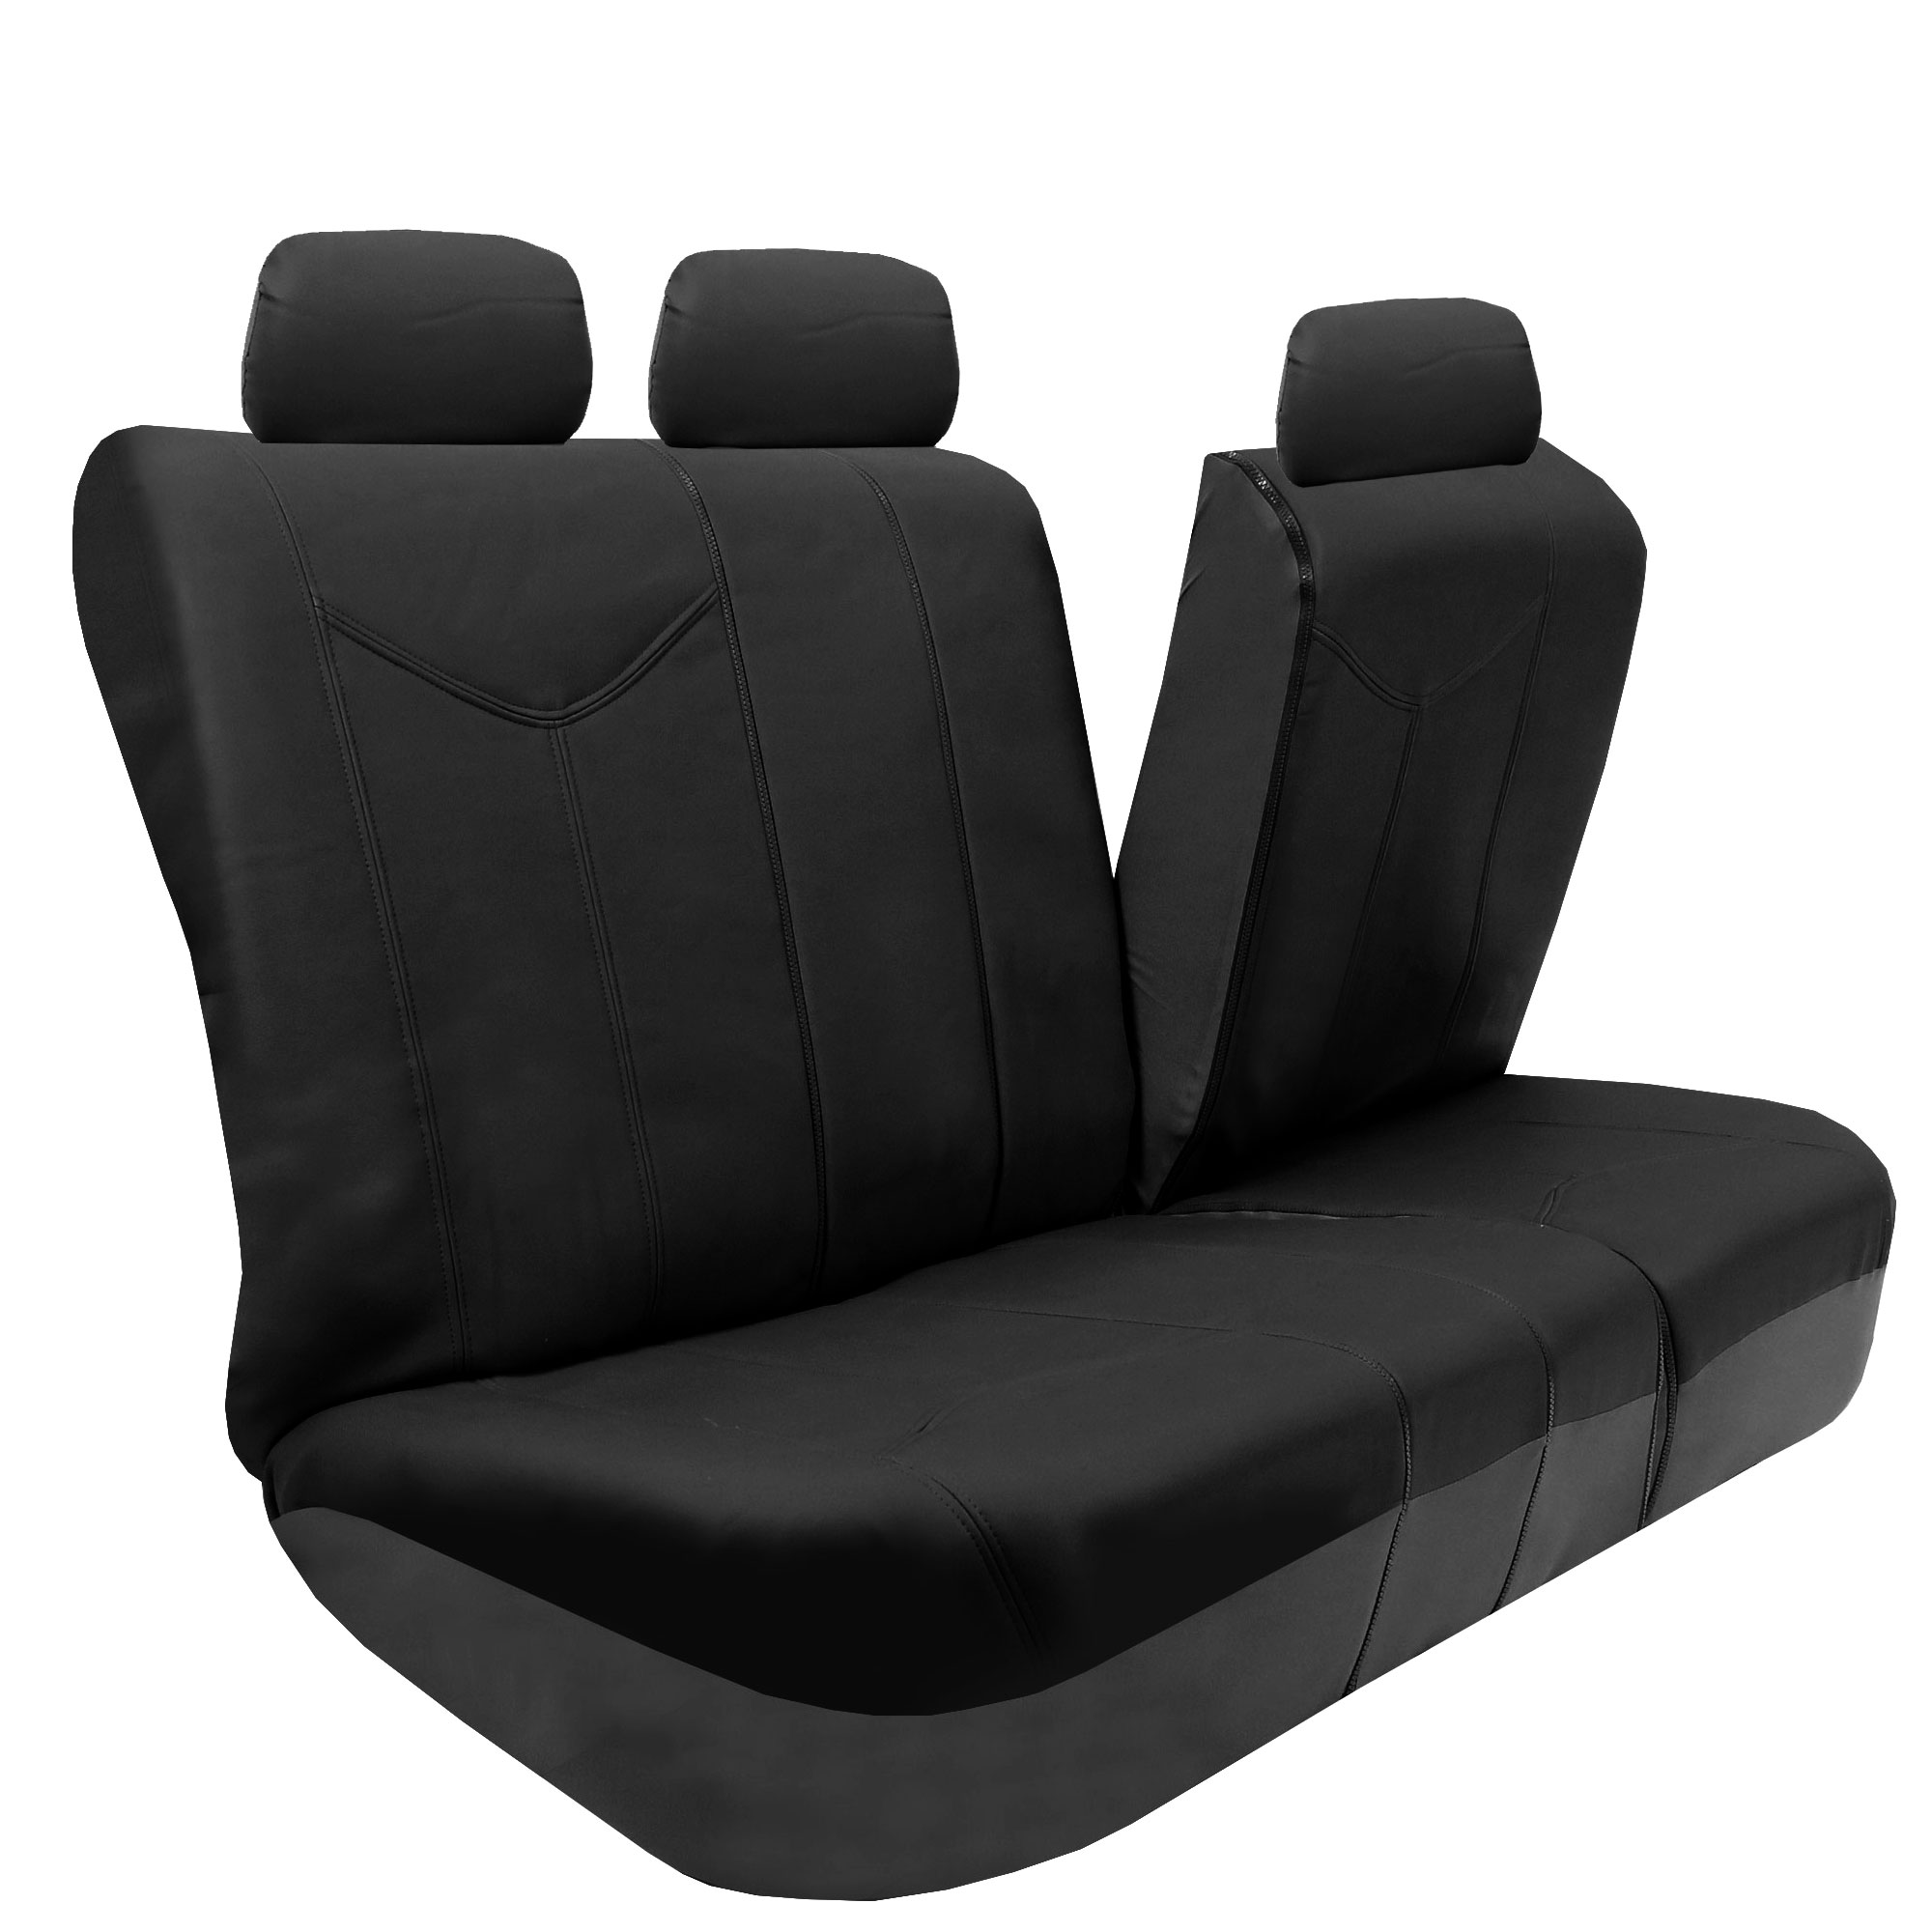 FH Group Black Rome Faux Leather Airbag Compatible and Split Bench 7 Seaters Car Van Seat Covers - Black Full Set - image 3 of 4